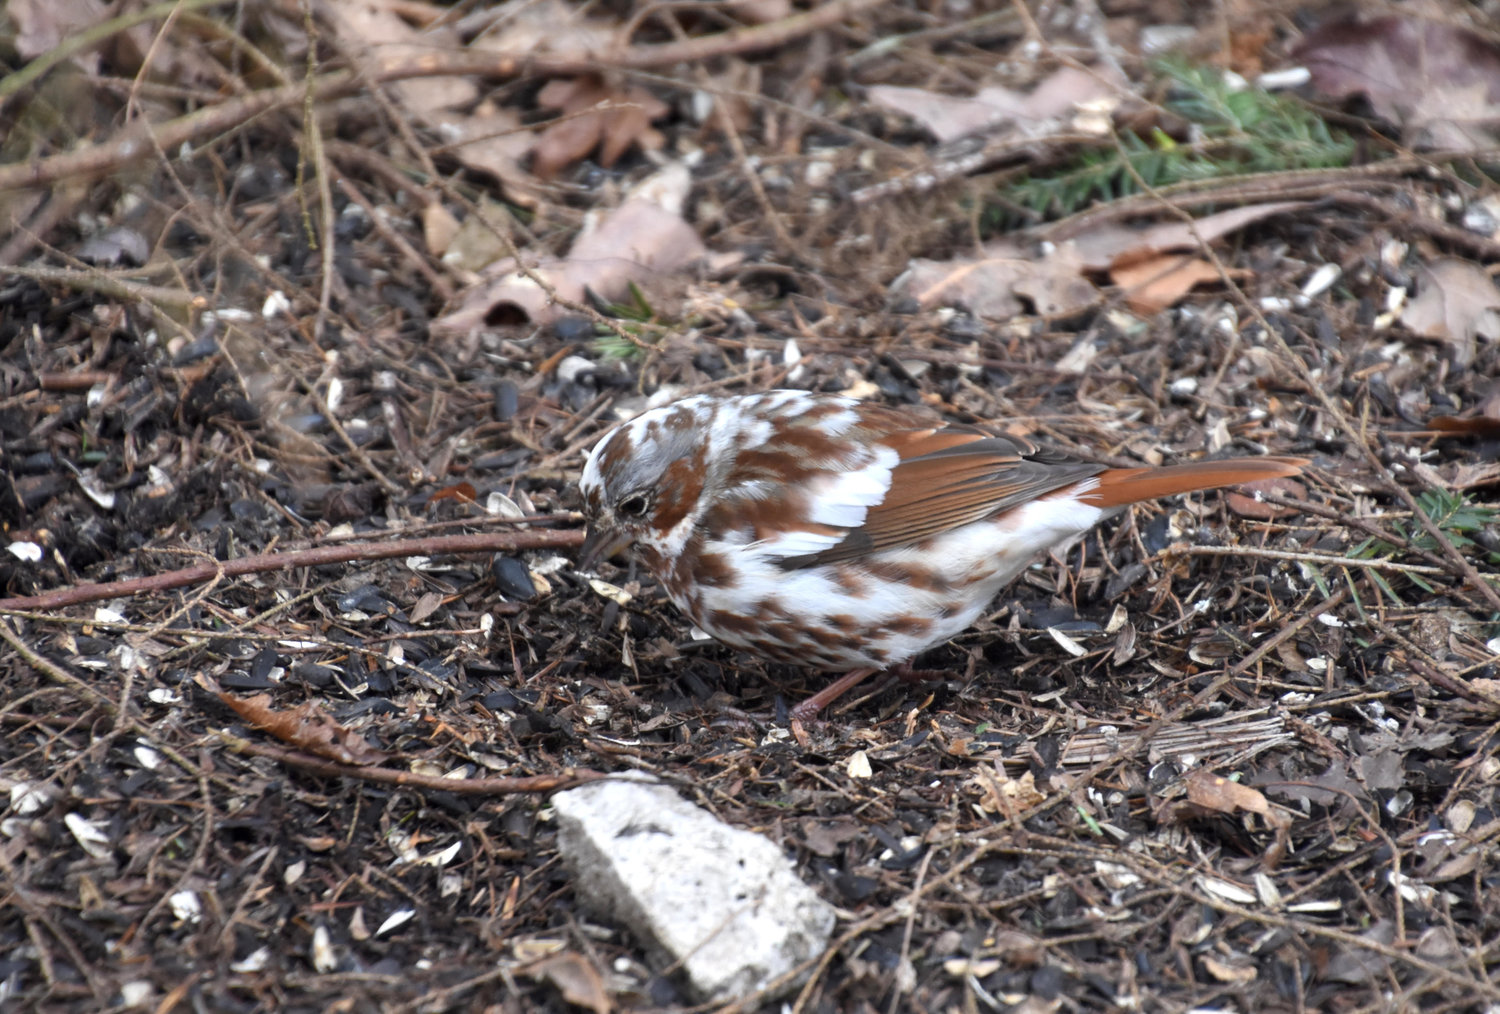 Views of the piebald leucistic fox sparrow from behind and from the left side.